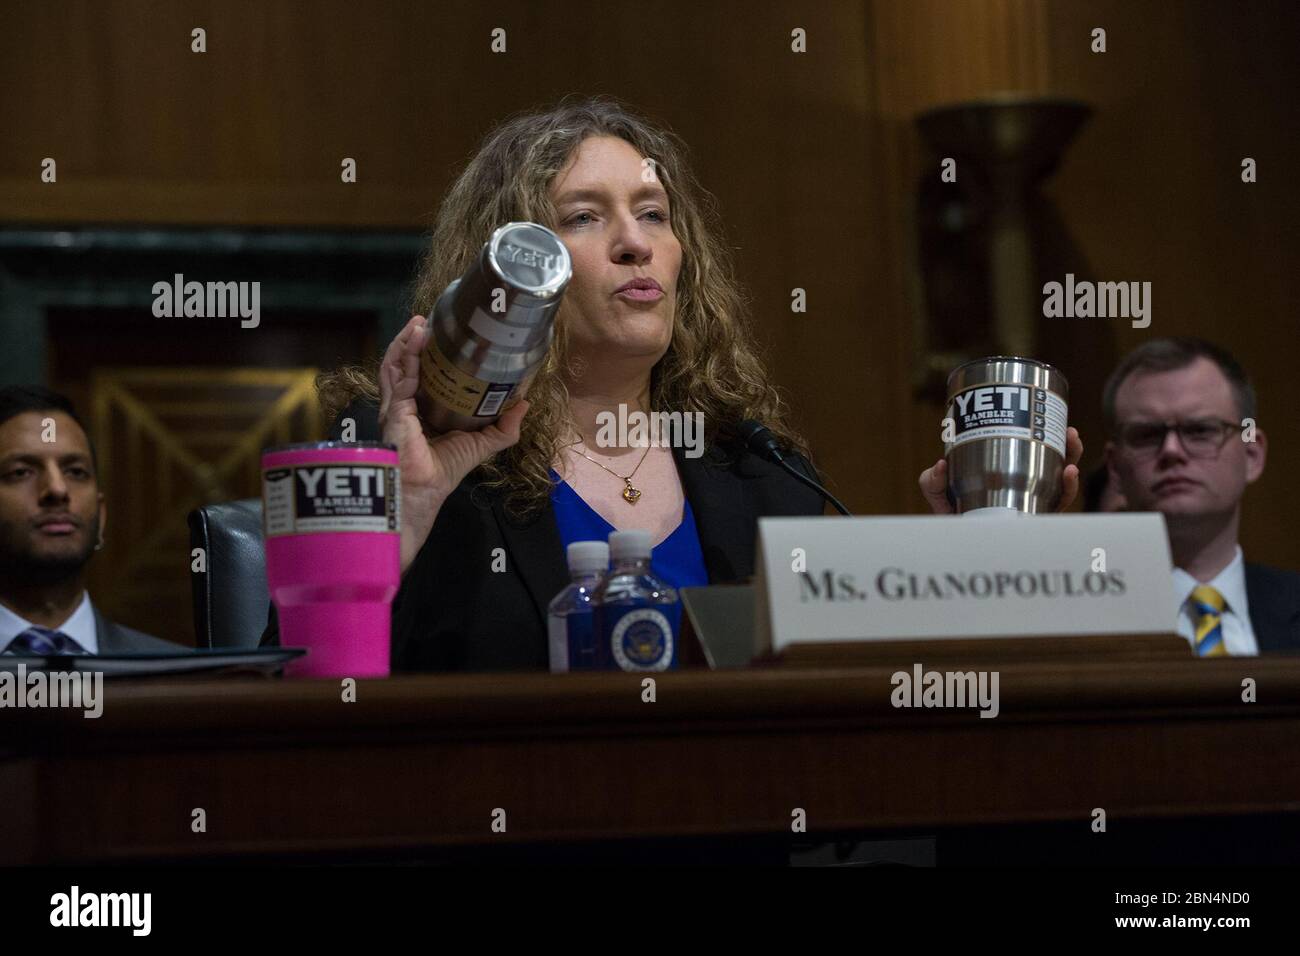 U.S. Customs and Border Protection (CBP), Office of Trade, Executive Assistant Commissioner Brenda Smith testifies before the Senate at the U.S. Senate Committee on Finance regarding &quot;Protecting E-commerce Consumers from Counterfeits&quot; on March 6, 2018.  Seen here is Ms. Kimberly Gianopoulos, Director, International Affairs and Trade, United States Government Accountability Office, Washington , DC. Stock Photo